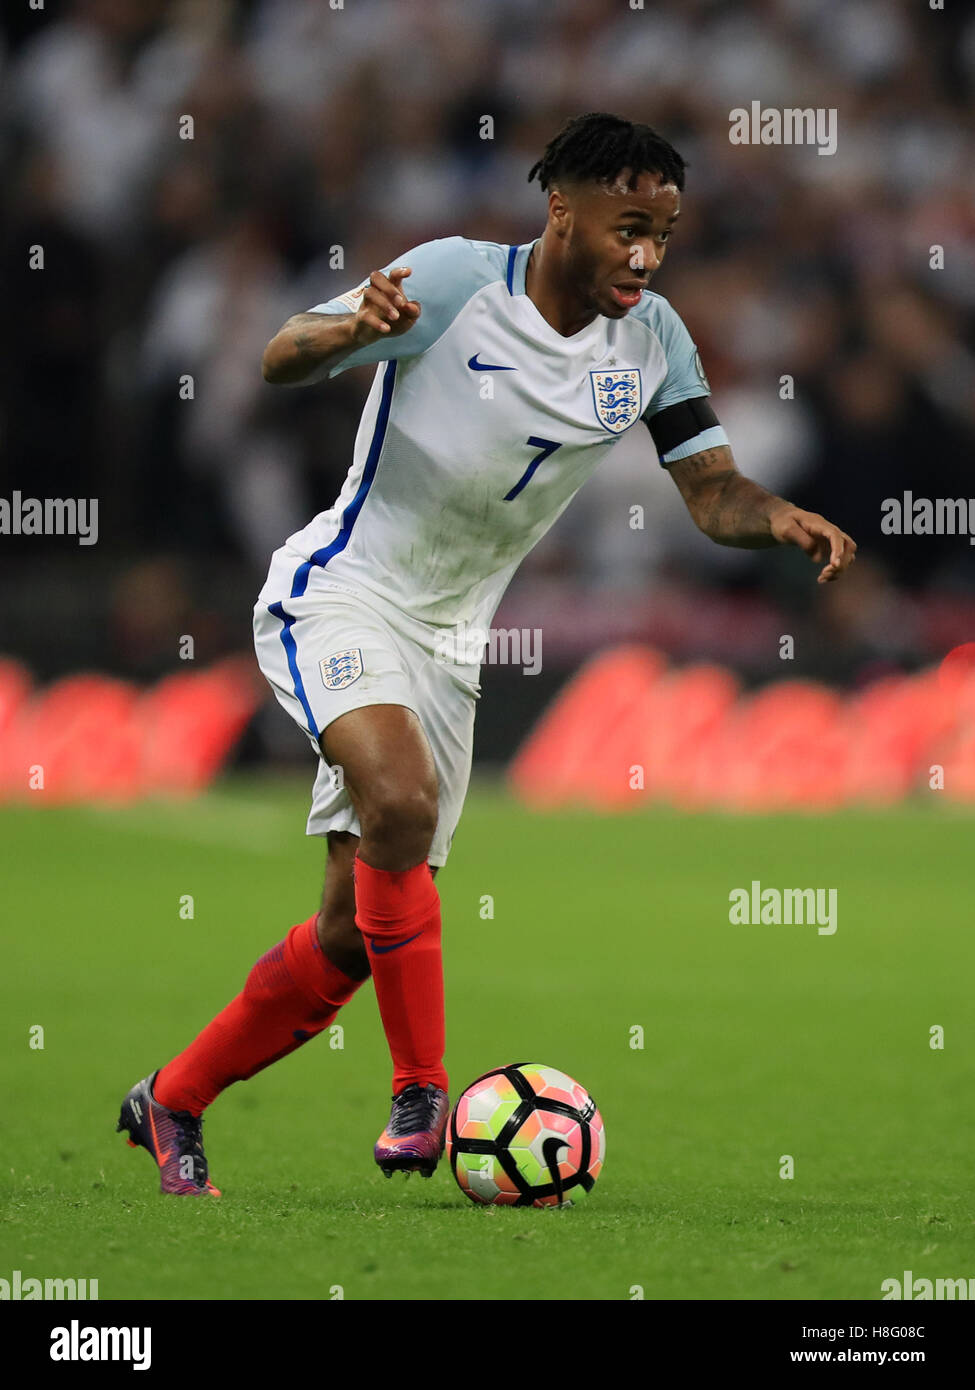 England's Raheem Sterling during the 2018 FIFA World Cup qualifying, Group F match at Wembley Stadium, London. PRESS ASSOCIATION Photo. Picture date: Friday November 11, 2016. See PA story SOCCER England. Photo credit should read: Mike Egerton/PA Wire. Stock Photo